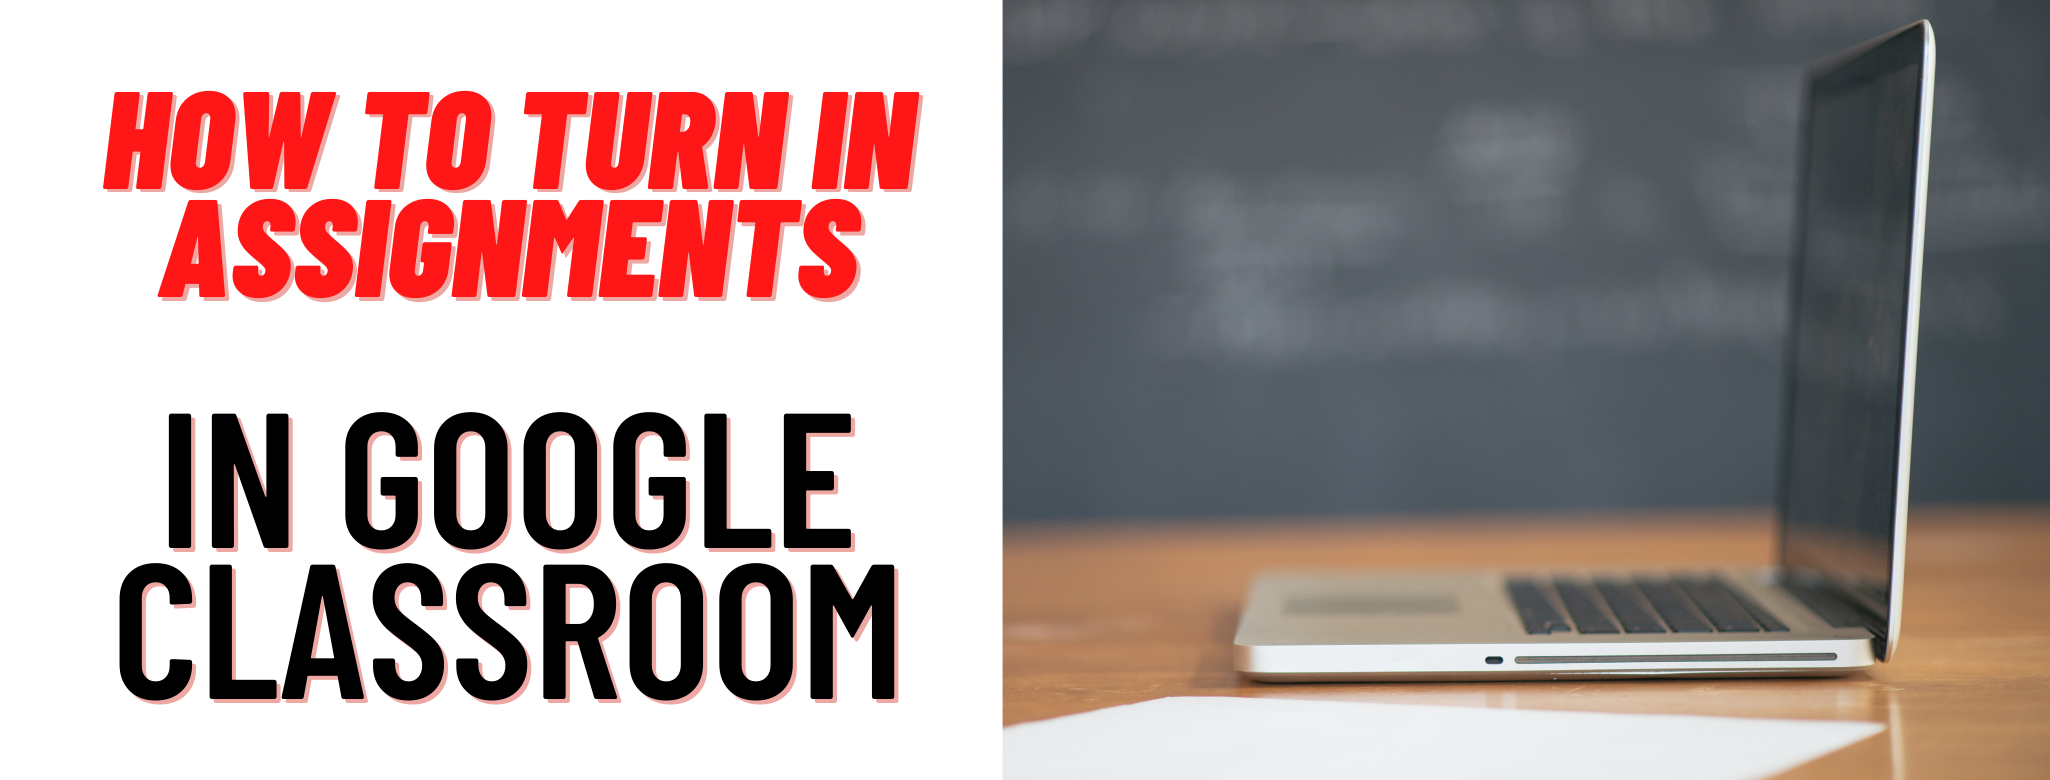 How to turn in assignments in Google Classroom